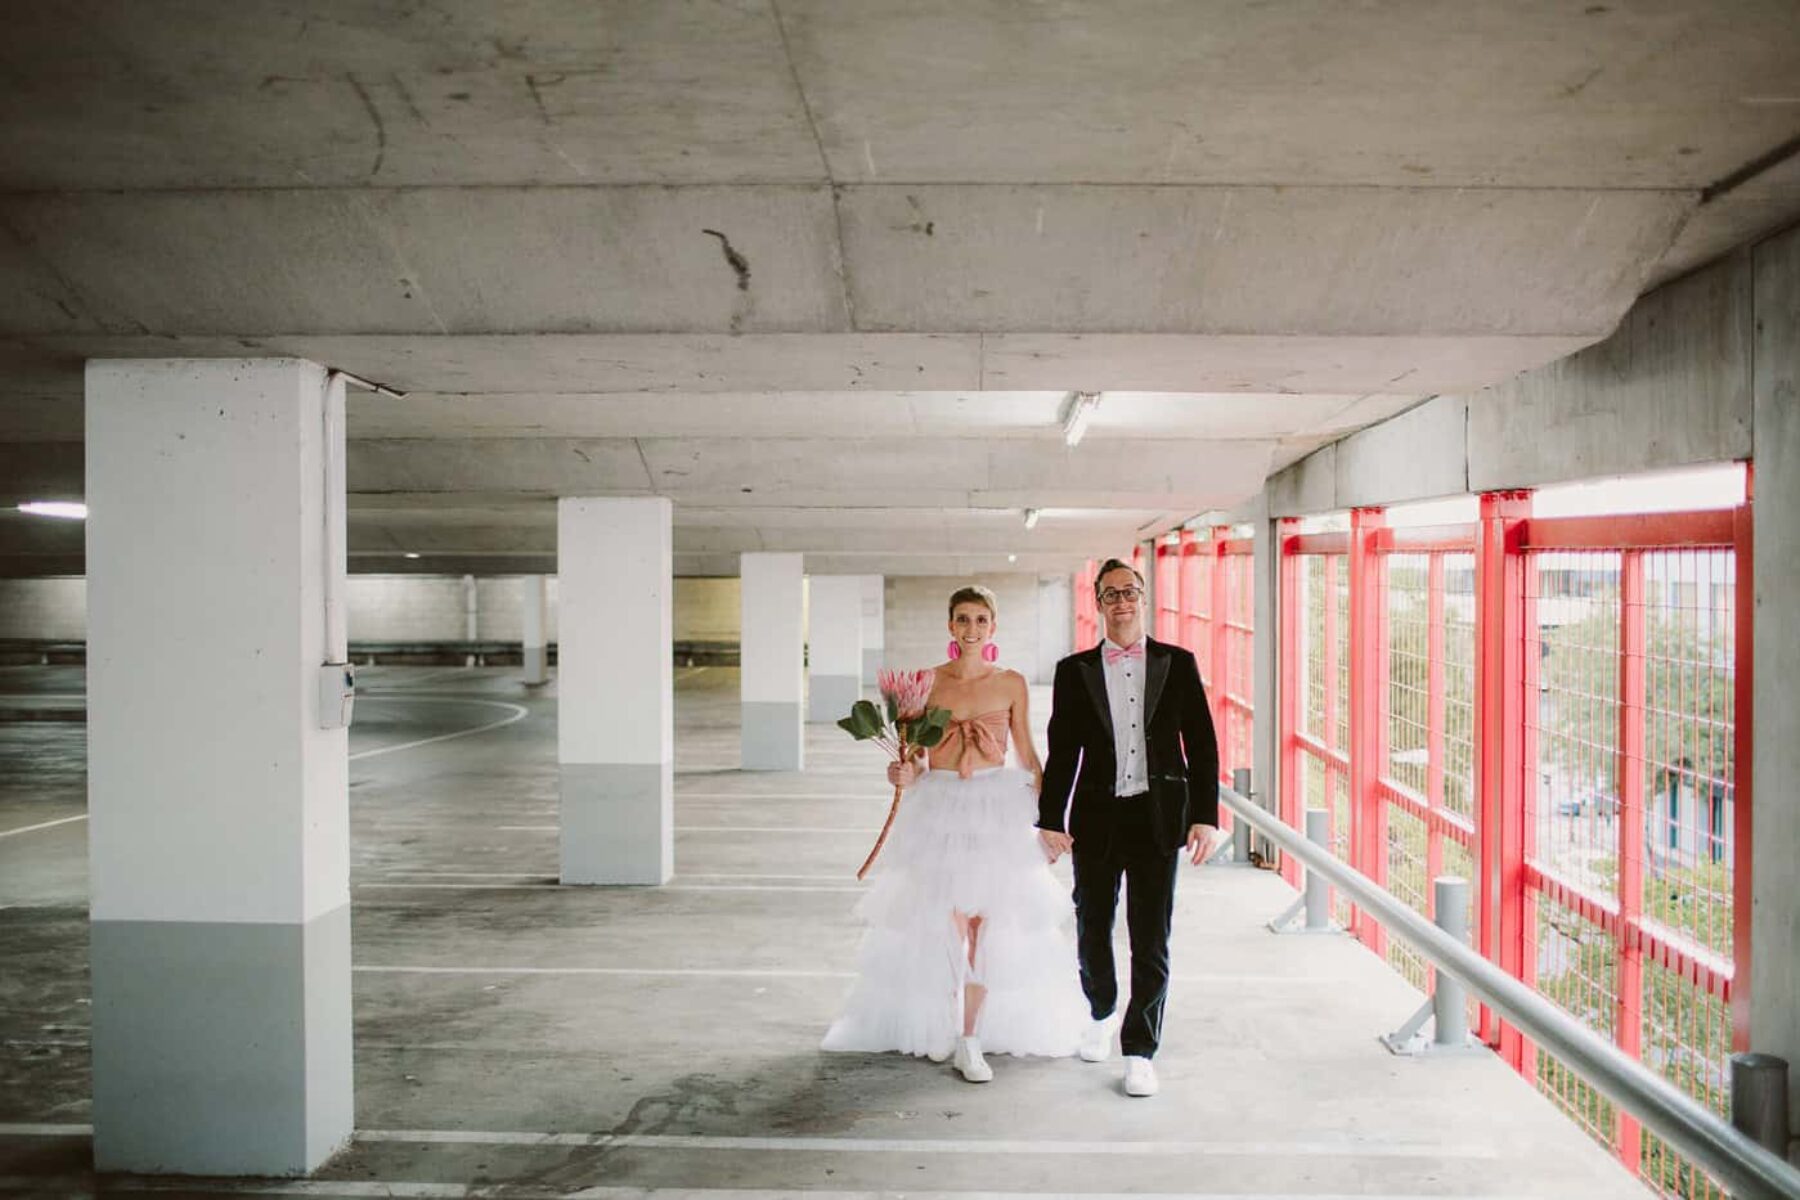 Adelaide wedding / photography by Kate Pardey